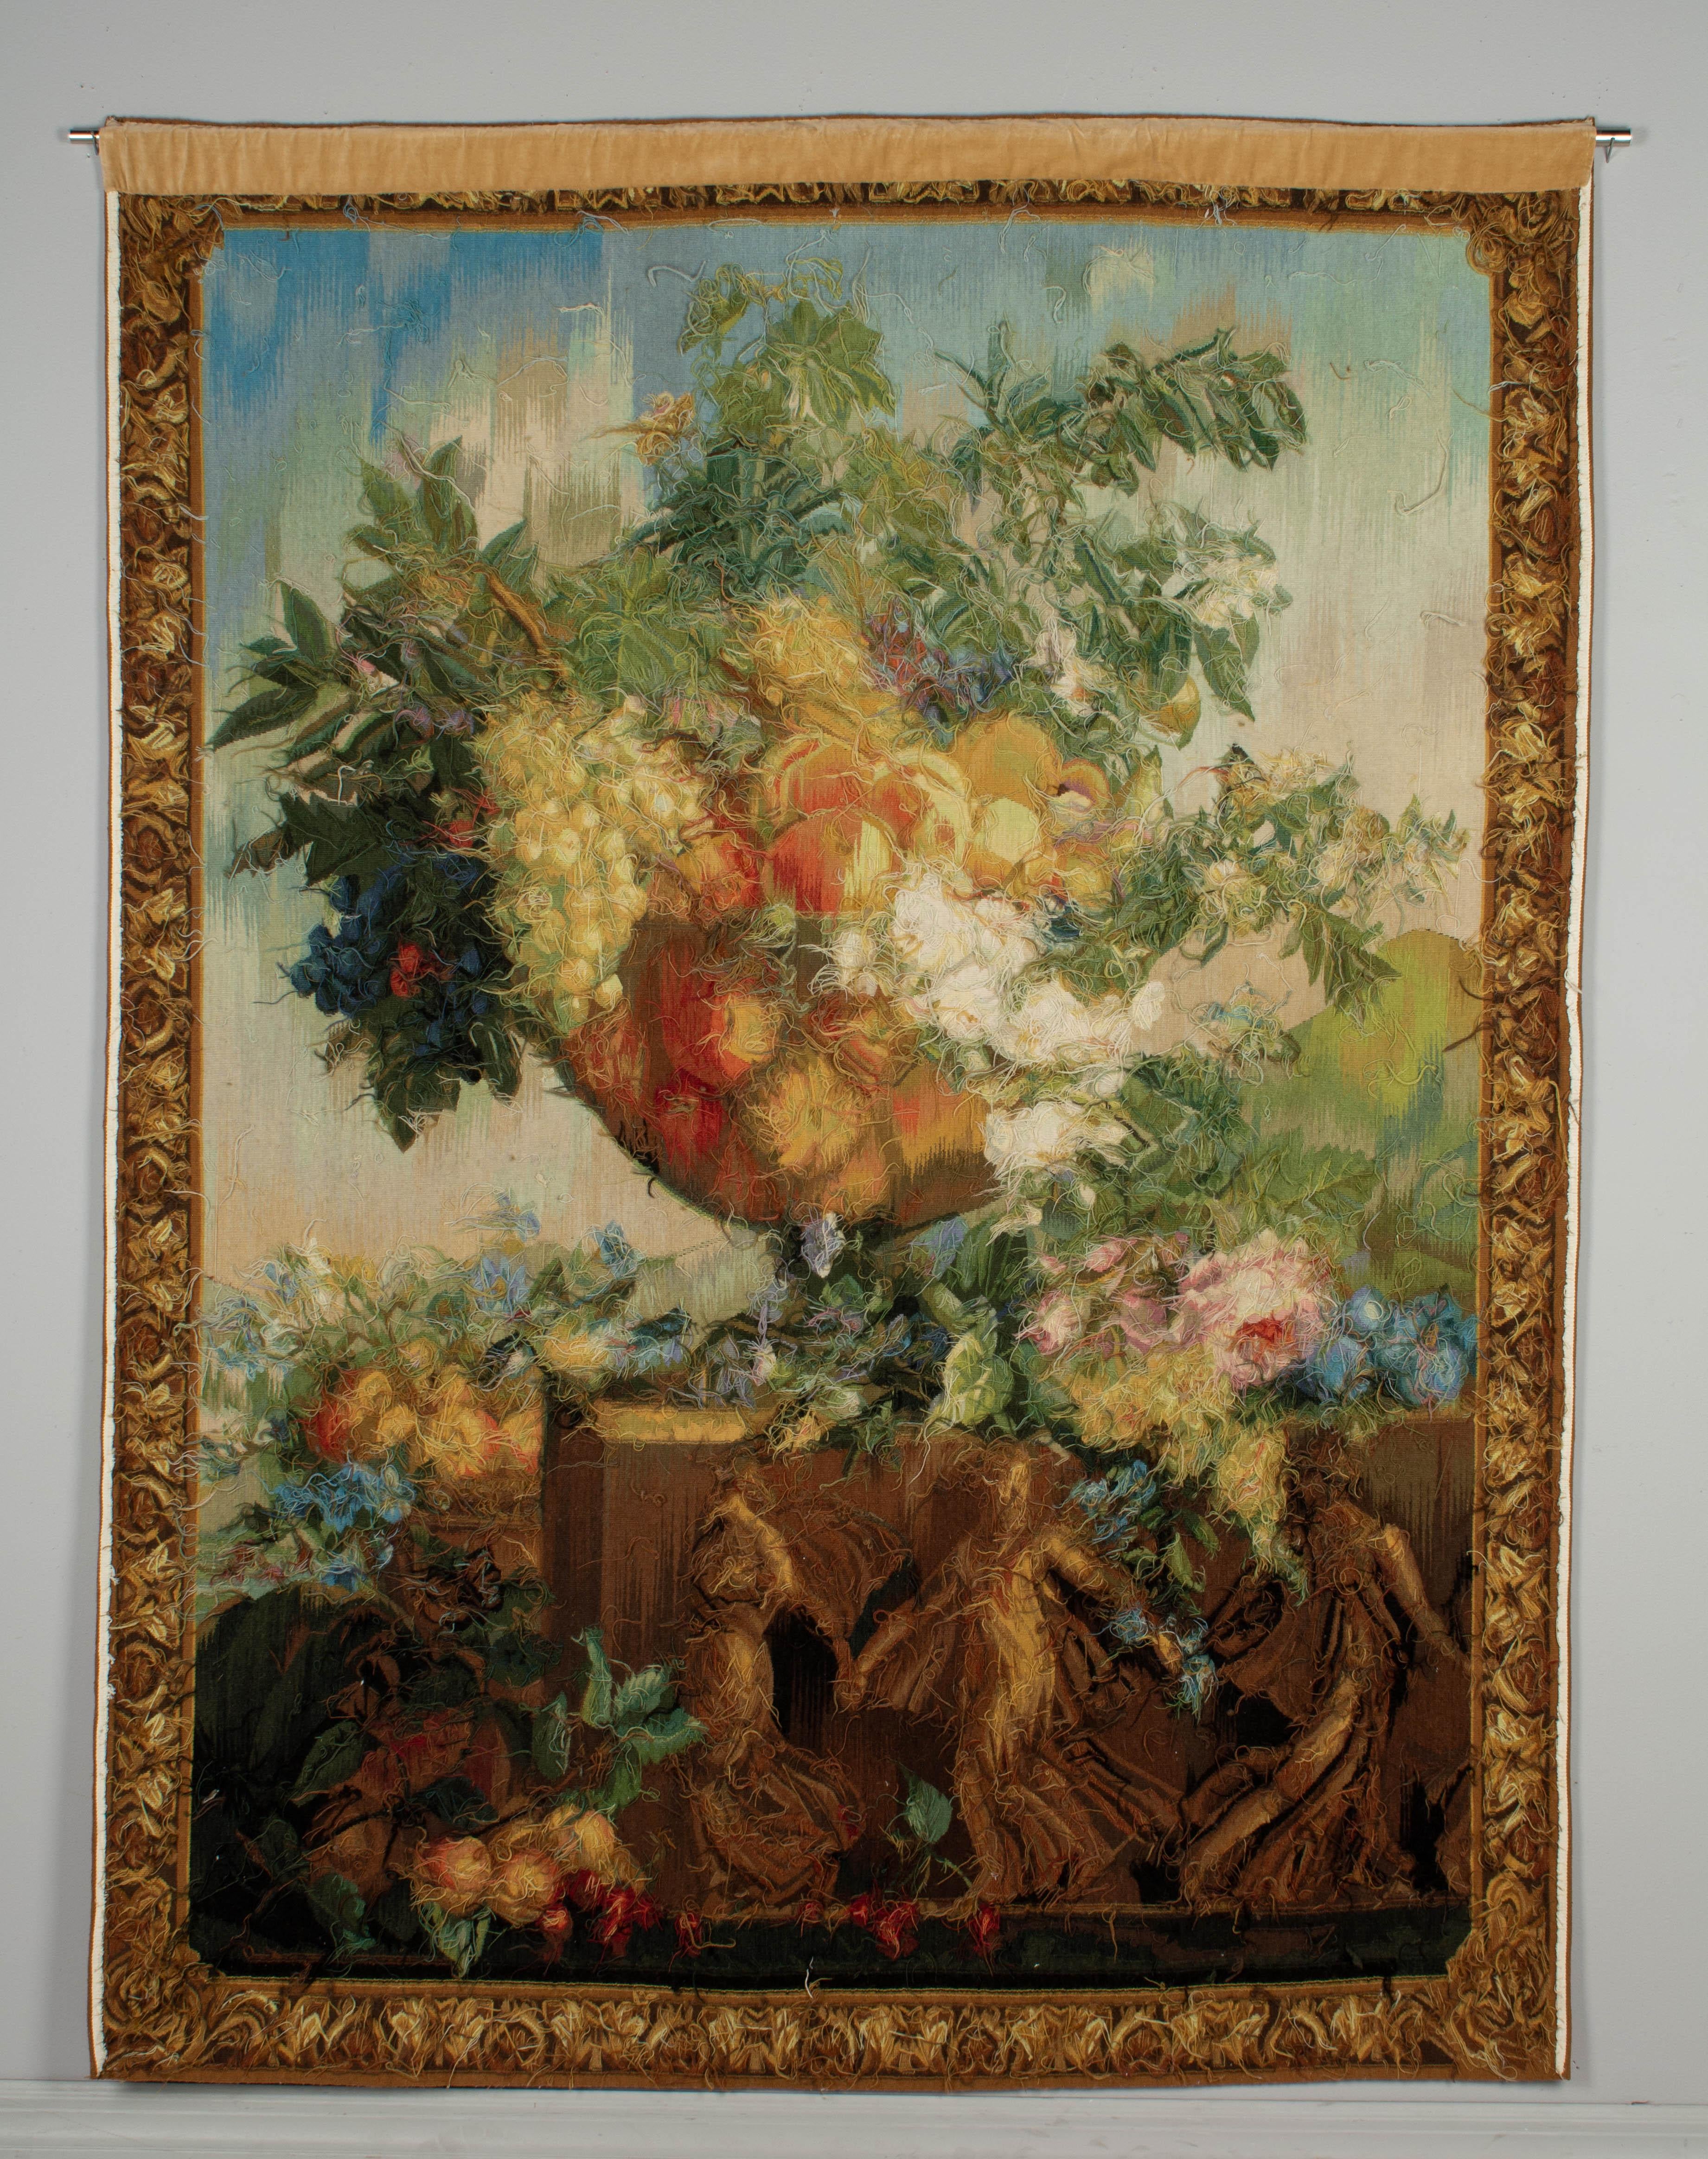 A large French wool tapestry, or wall hanging, depicting a Nature Morte, or floral still life. A large garden urn overflowing with flowers and fruits, including grapes, peaches, plums cherries and large pink roses. The urn rests on a large plinth